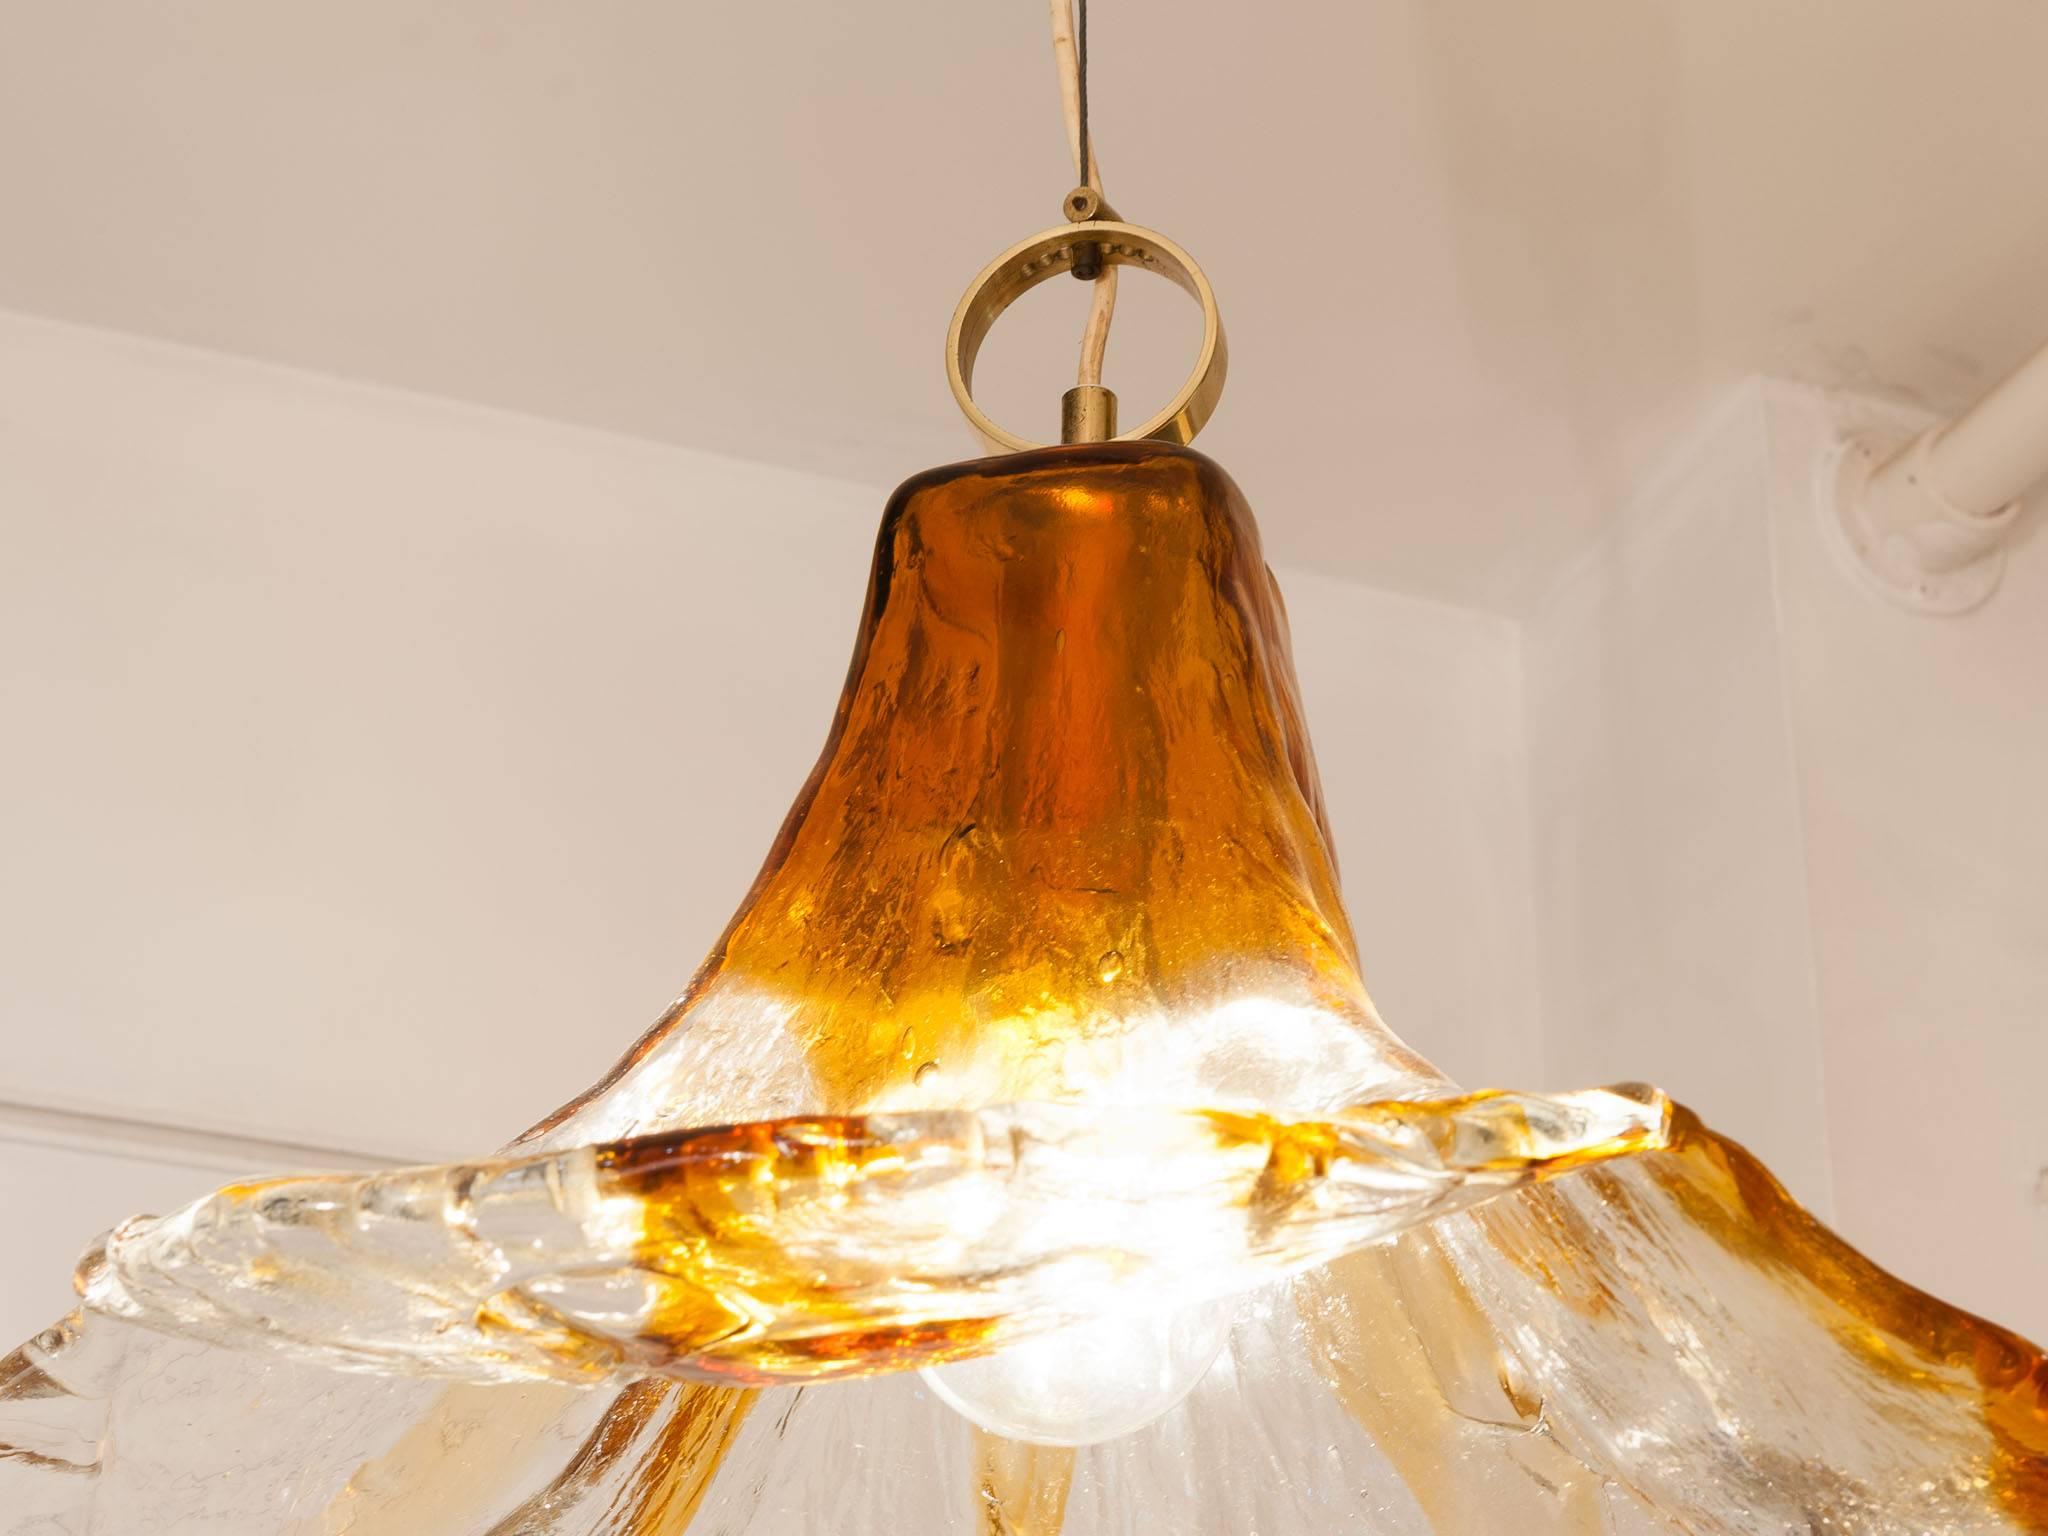 1970s Murano glass pendant hanging light by Mazzega in the shape of a flower with four petals. Handblown from one piece of glass with an orange and clear glass ripple design with a feature brass hooped fitting and ceiling cup. The light is quite